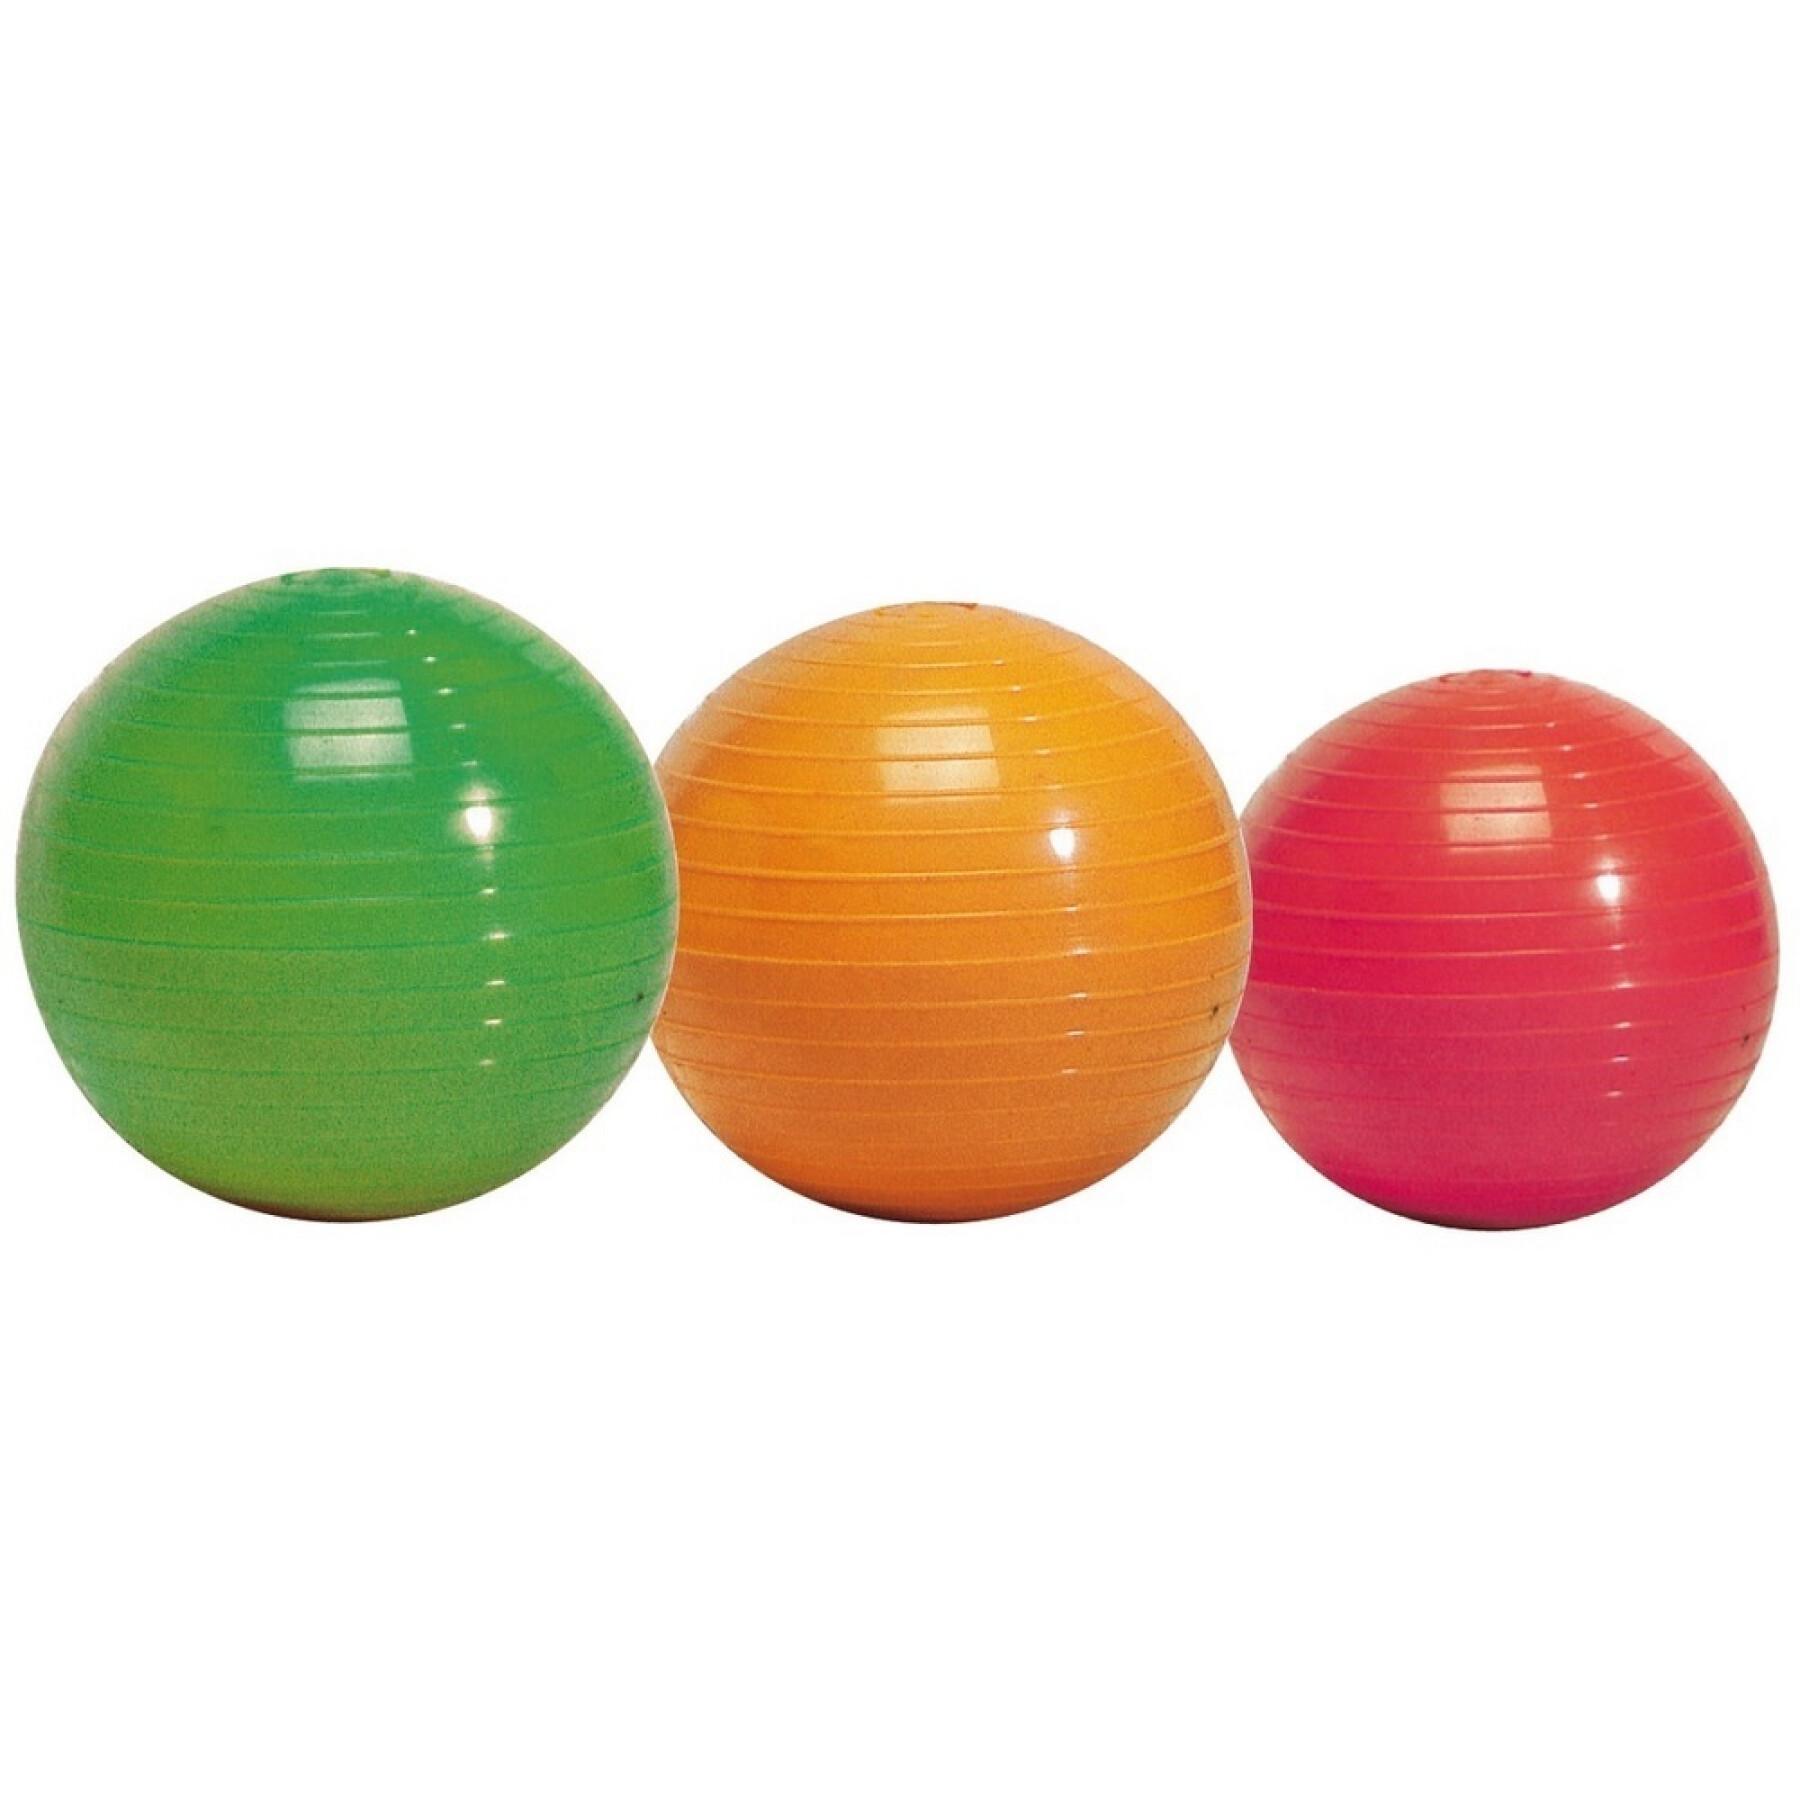 Weighted Tremblay ball 500 g